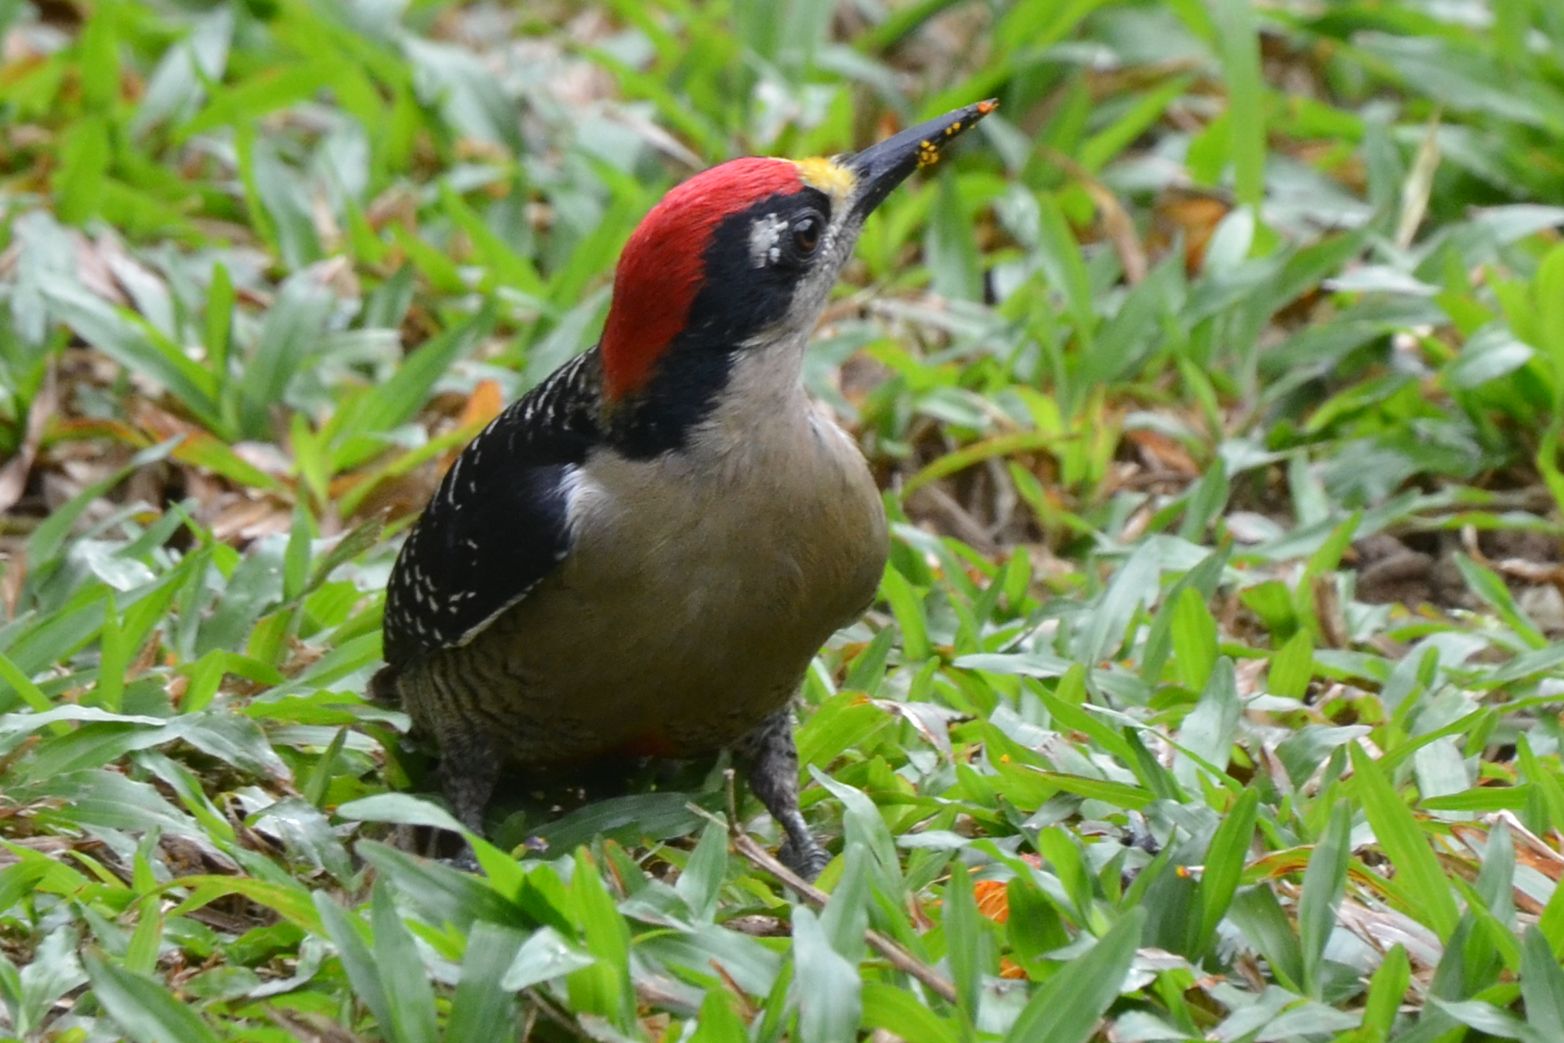 Click picture to see more Black-cheeked Woodpeckers.